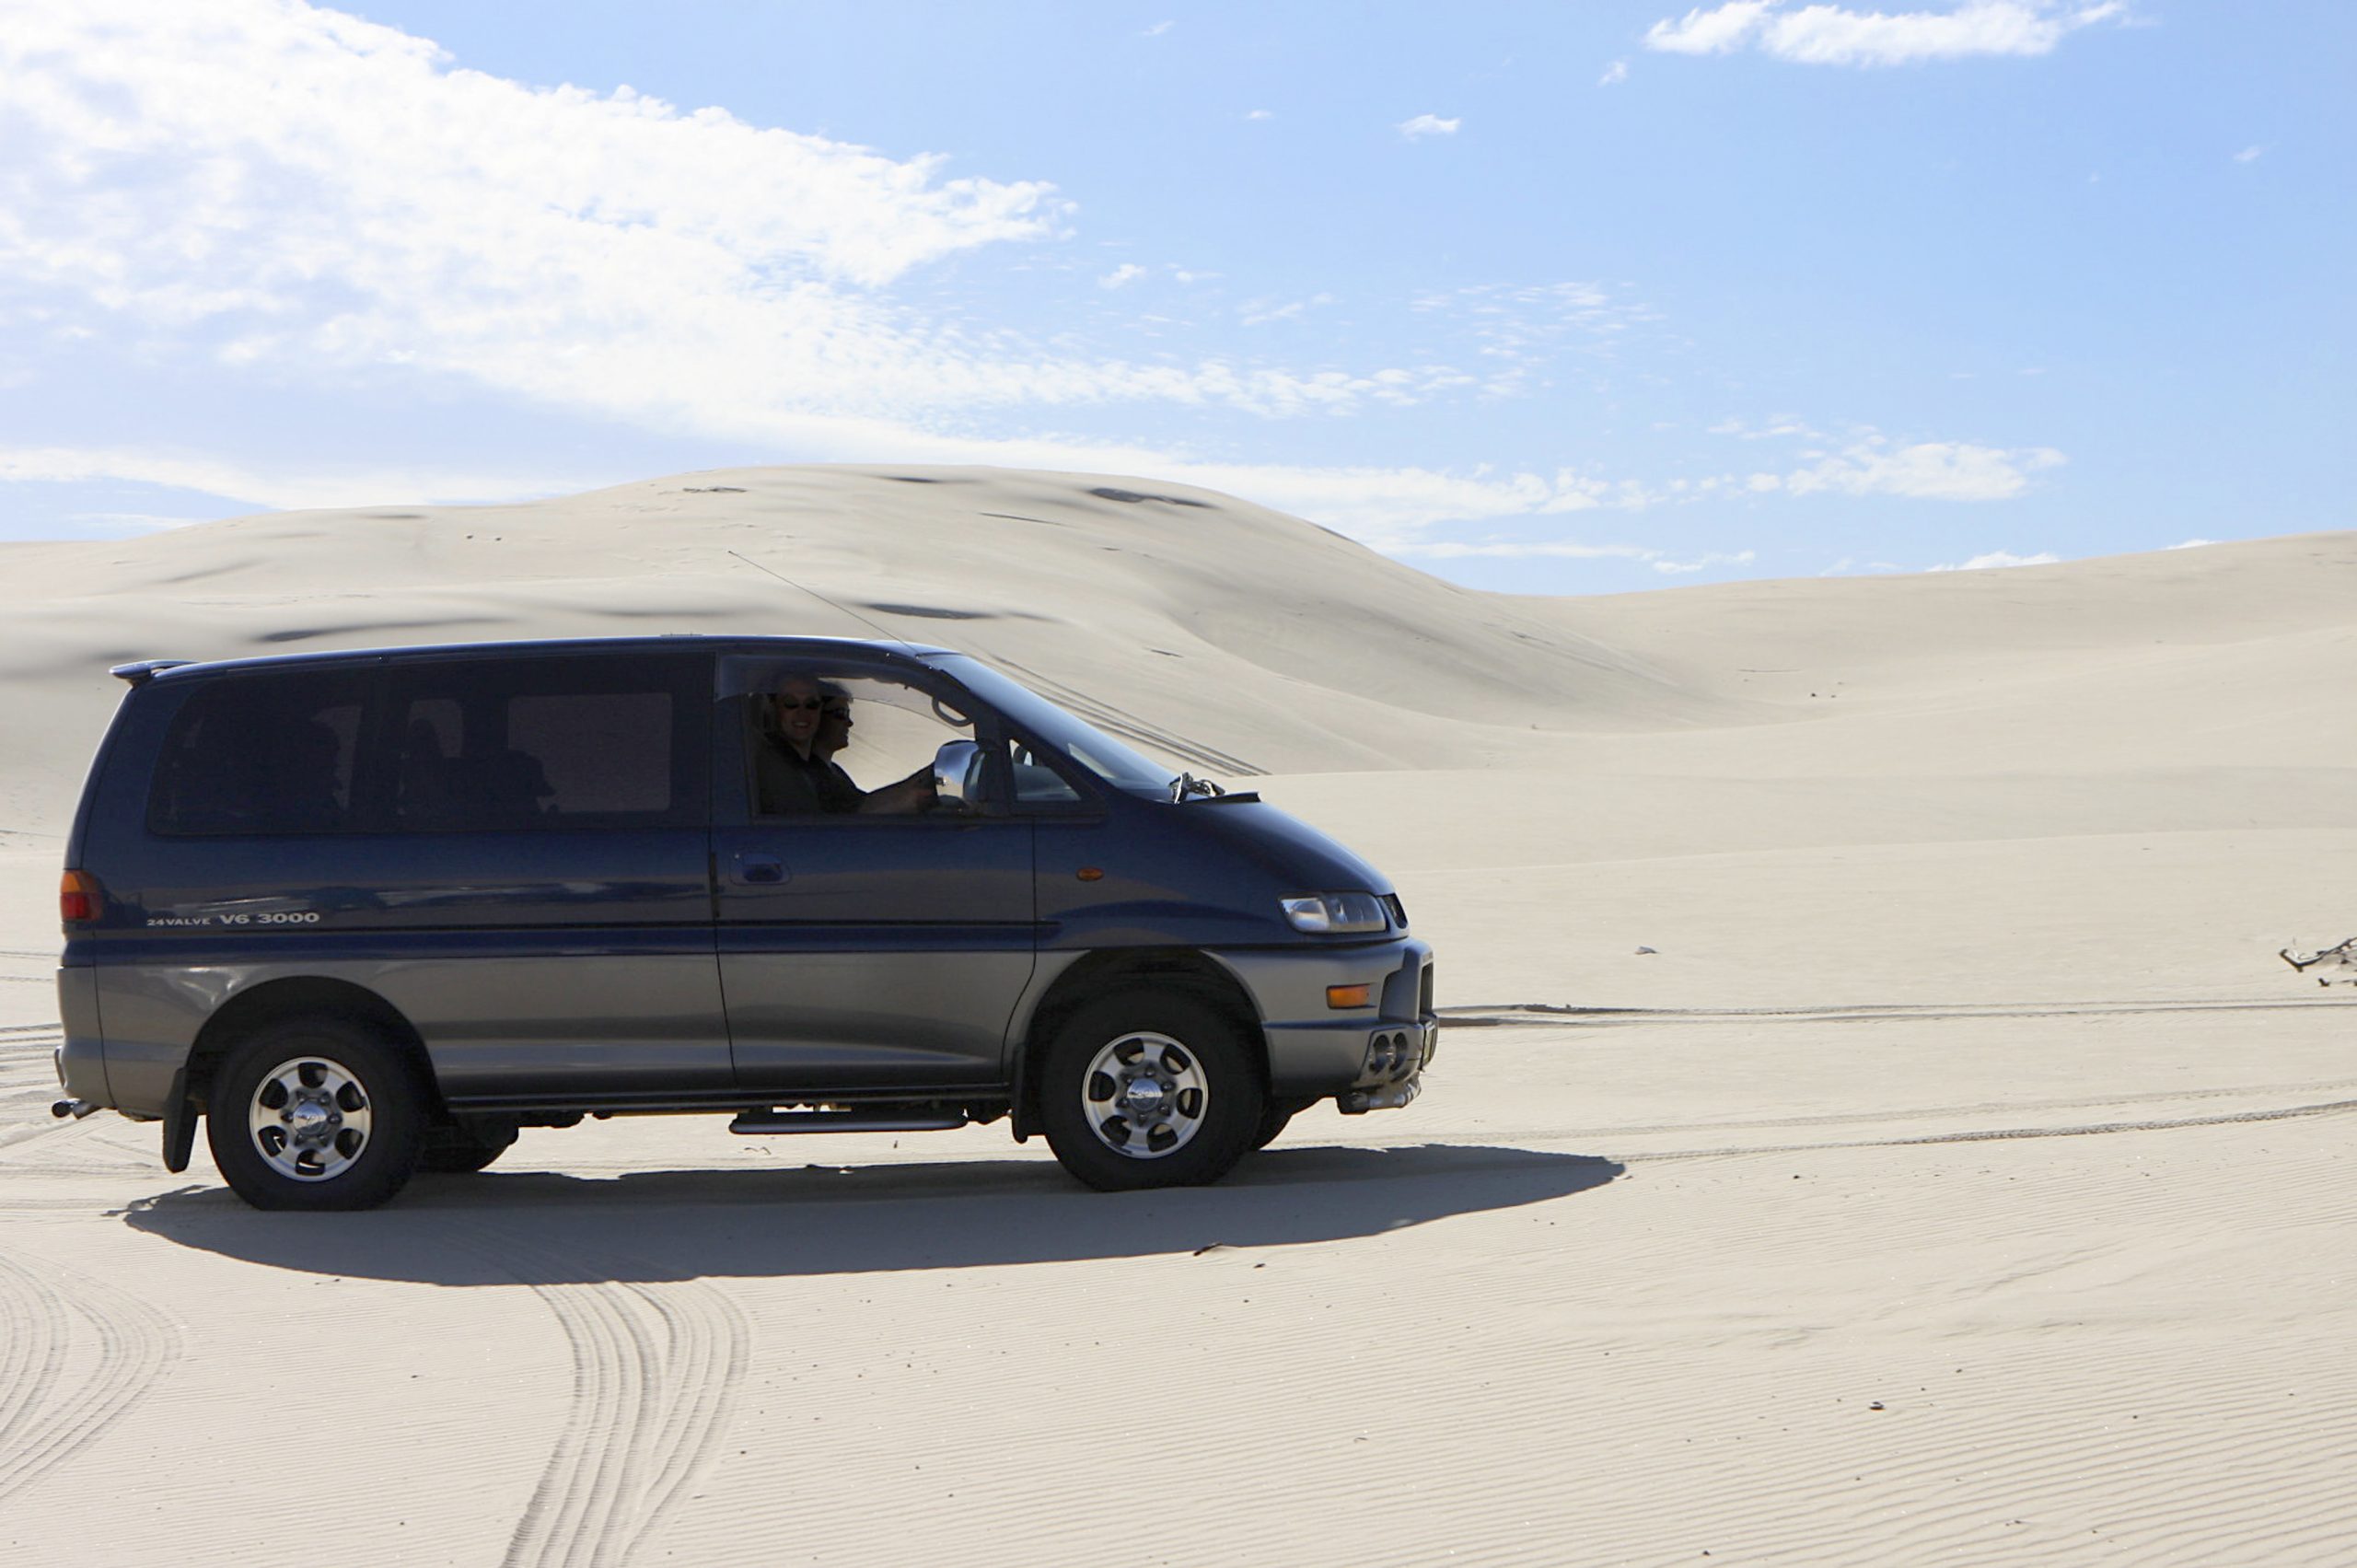 A green and gold JDM Mitsubishi Delica van shot in profile in the desert